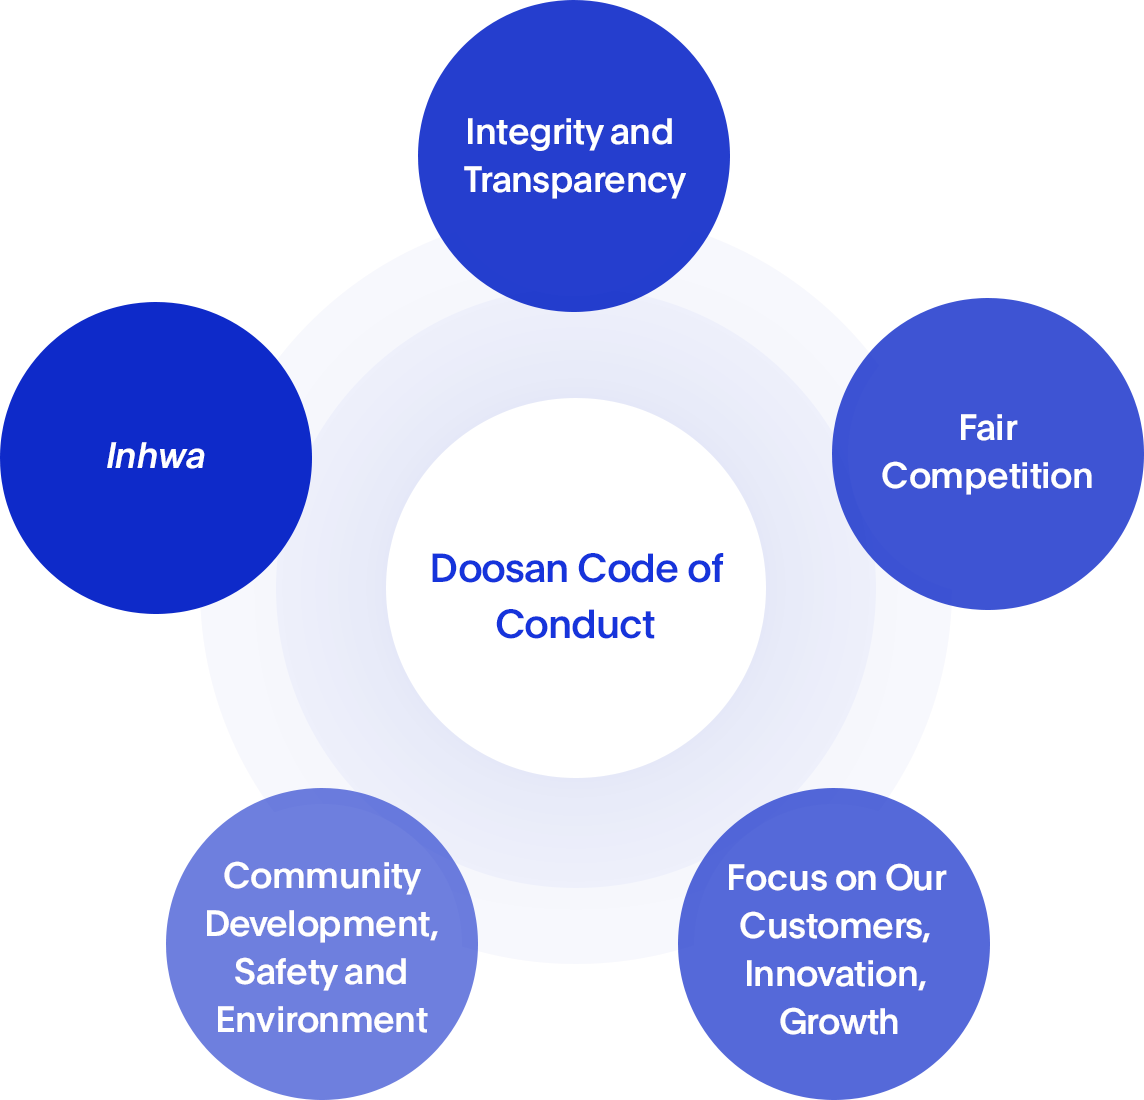 Doosan Code of Conduct Image - Integrity and Transparency, Fair Competition, Focus on Our Customers, Innovation, Growth, Community Development, Safety and Environment, Inhwa